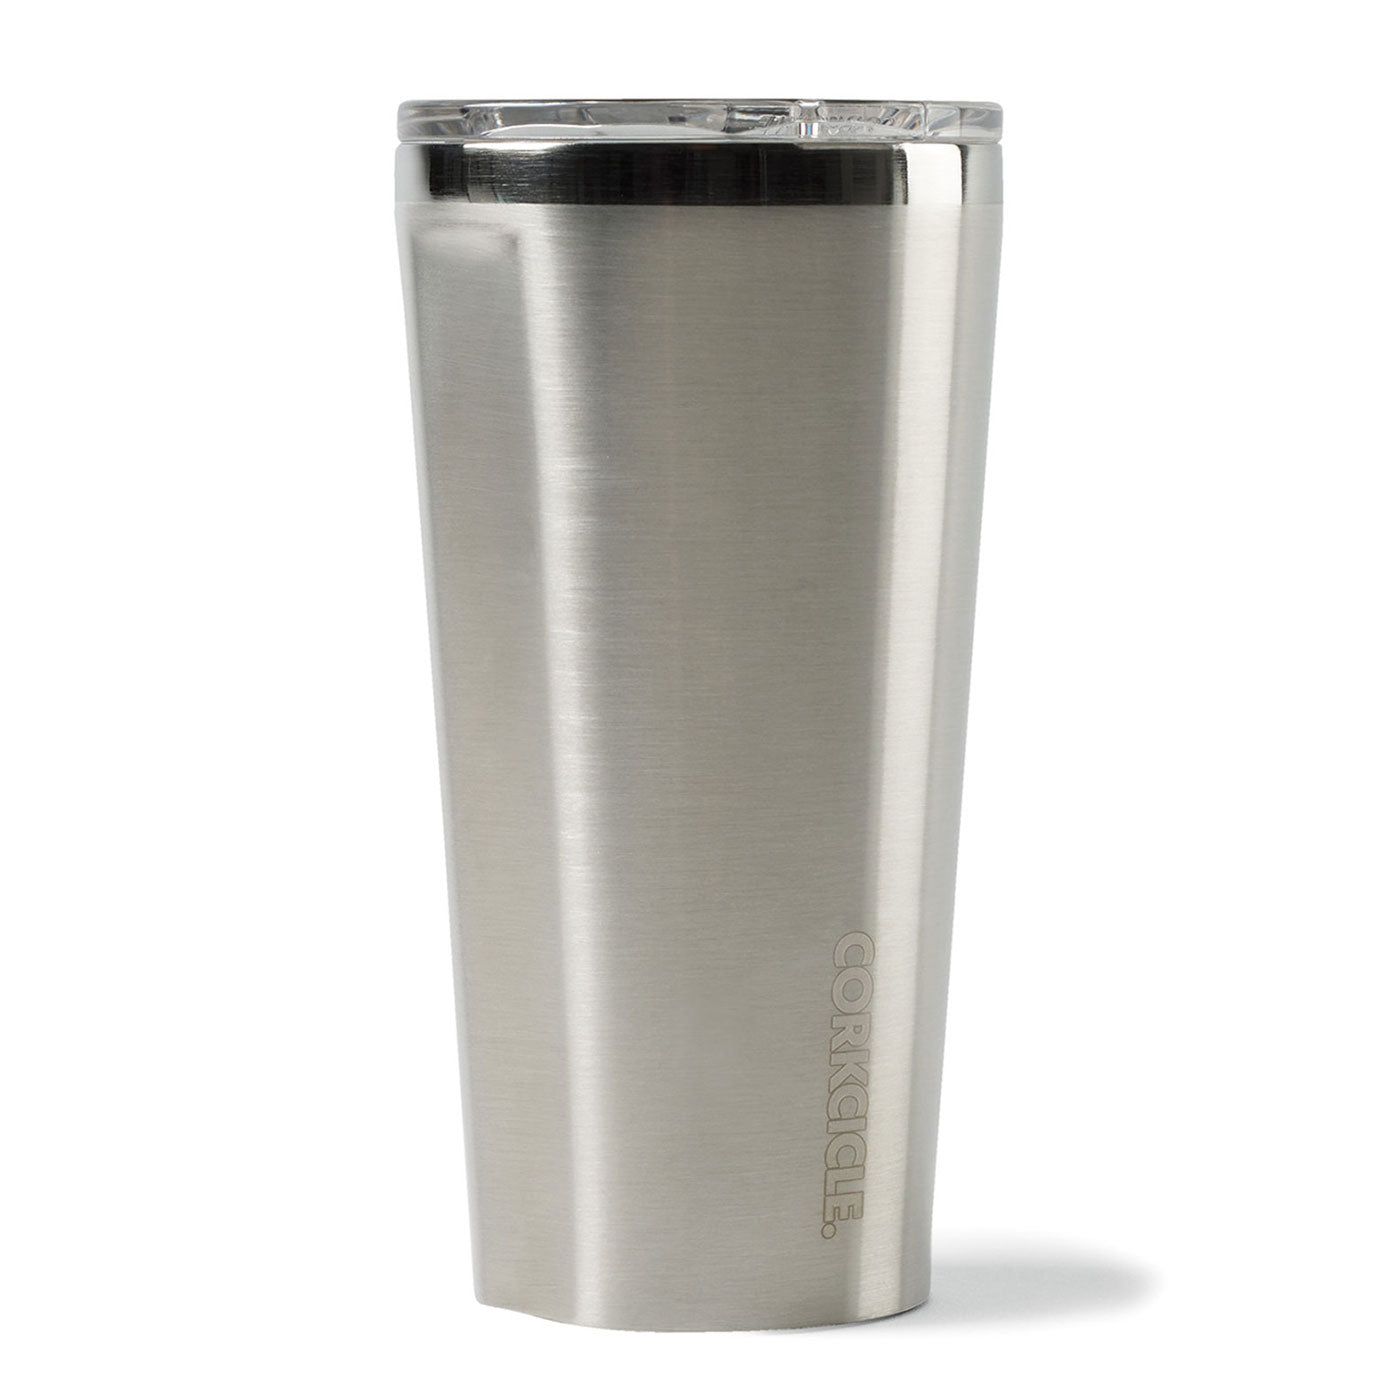 Corkcicle Tumbler 16 Oz., Brushed Stainless Silver